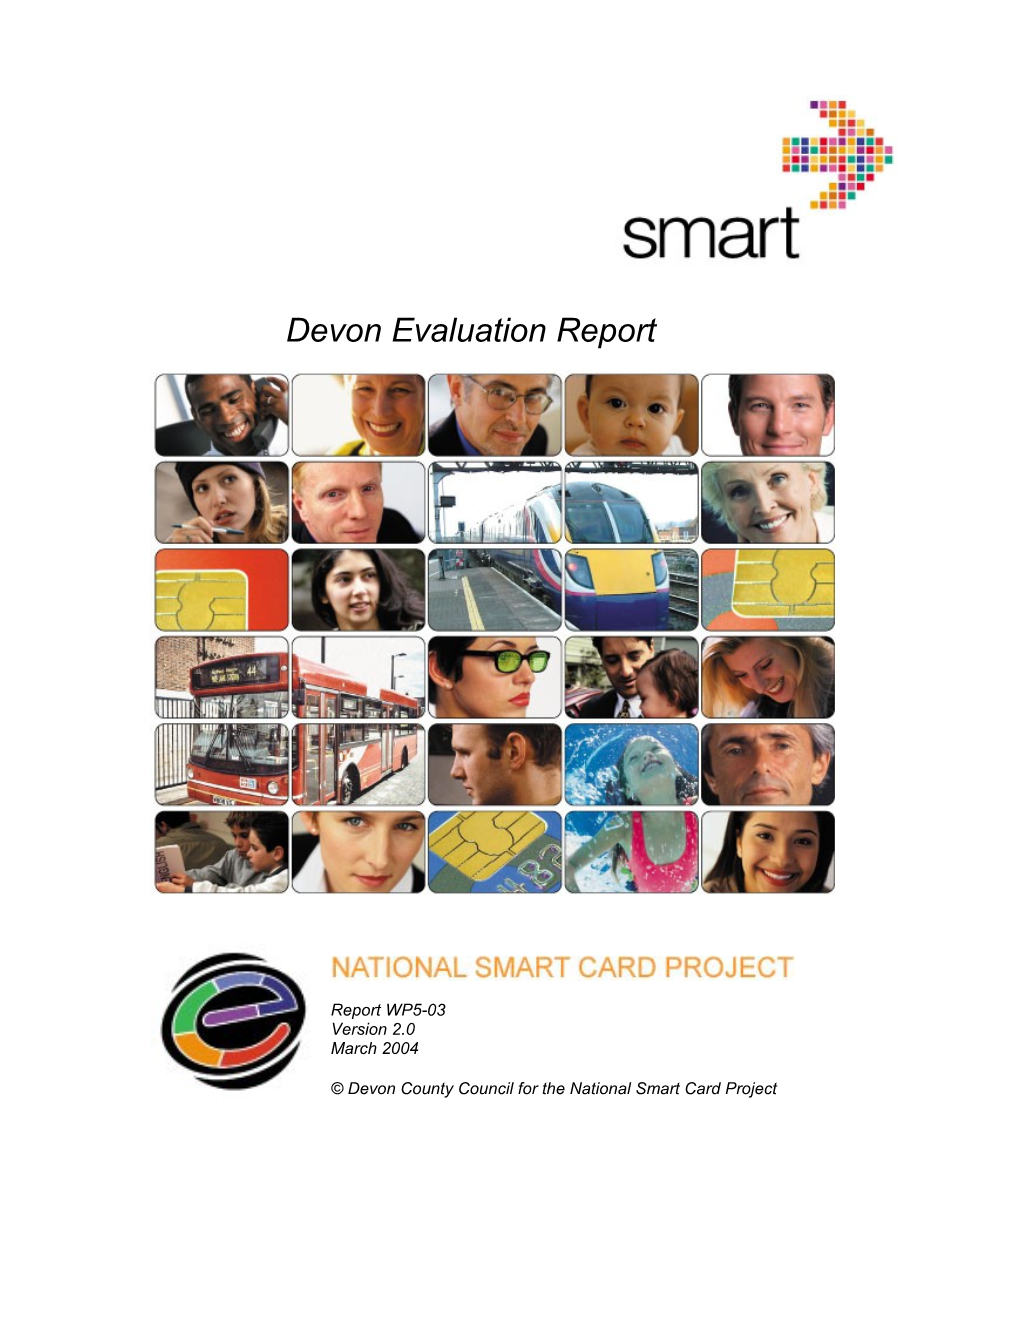 Devon County Council for the National Smart Card Project